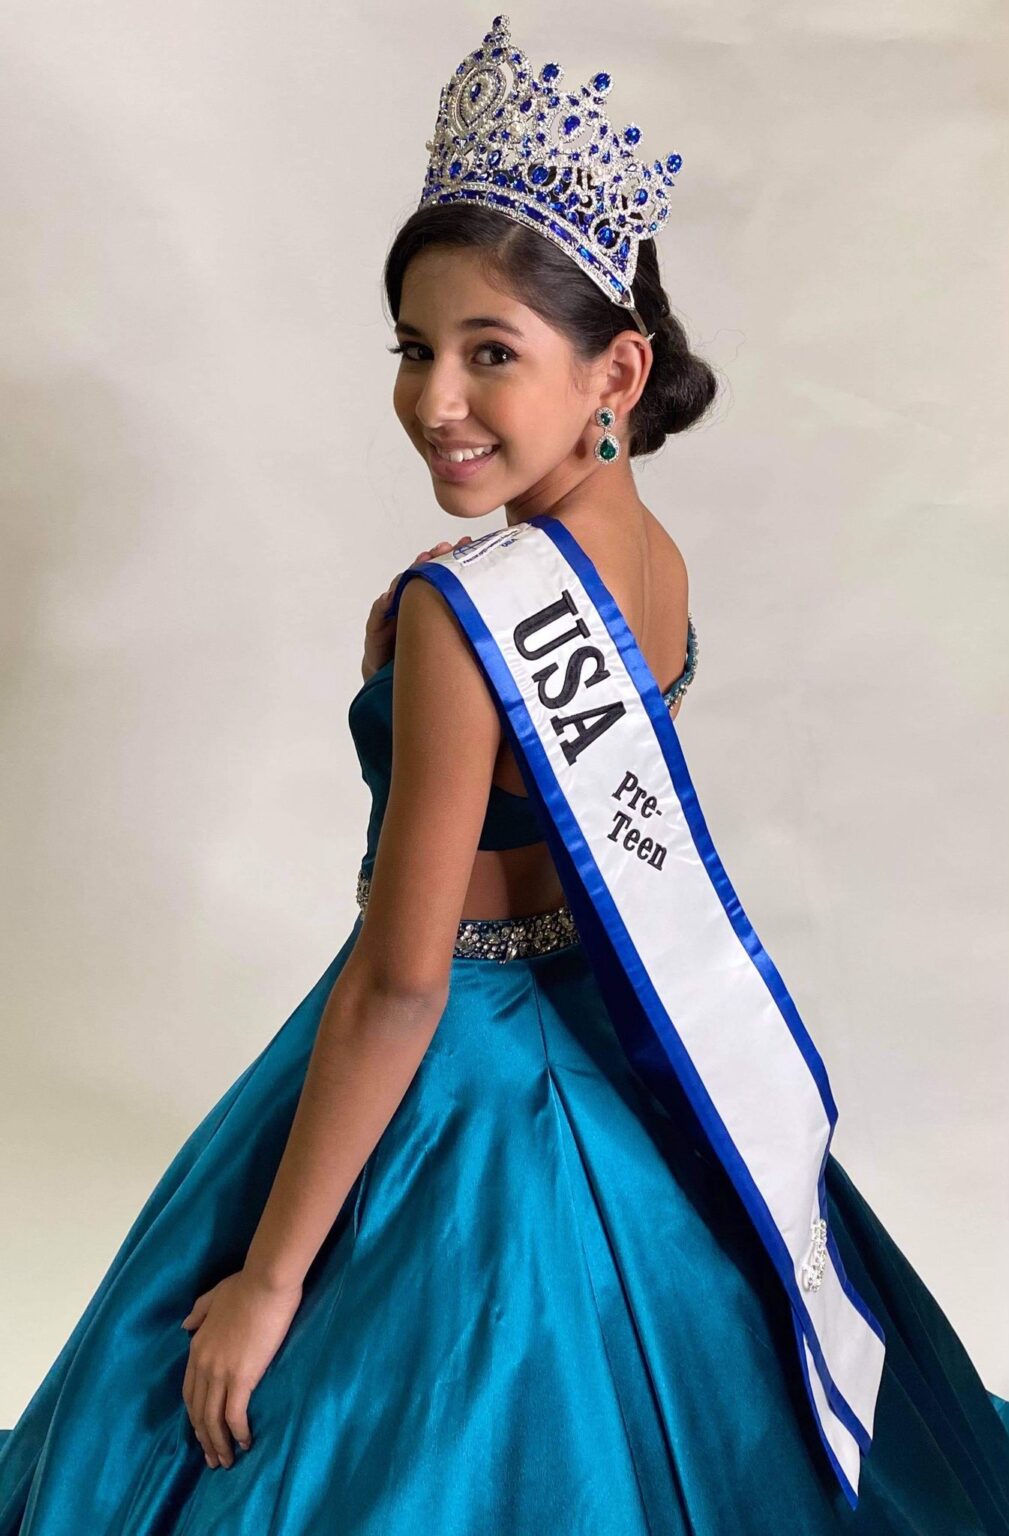 Vernon student is crowned Junior Miss United World USA Preteen